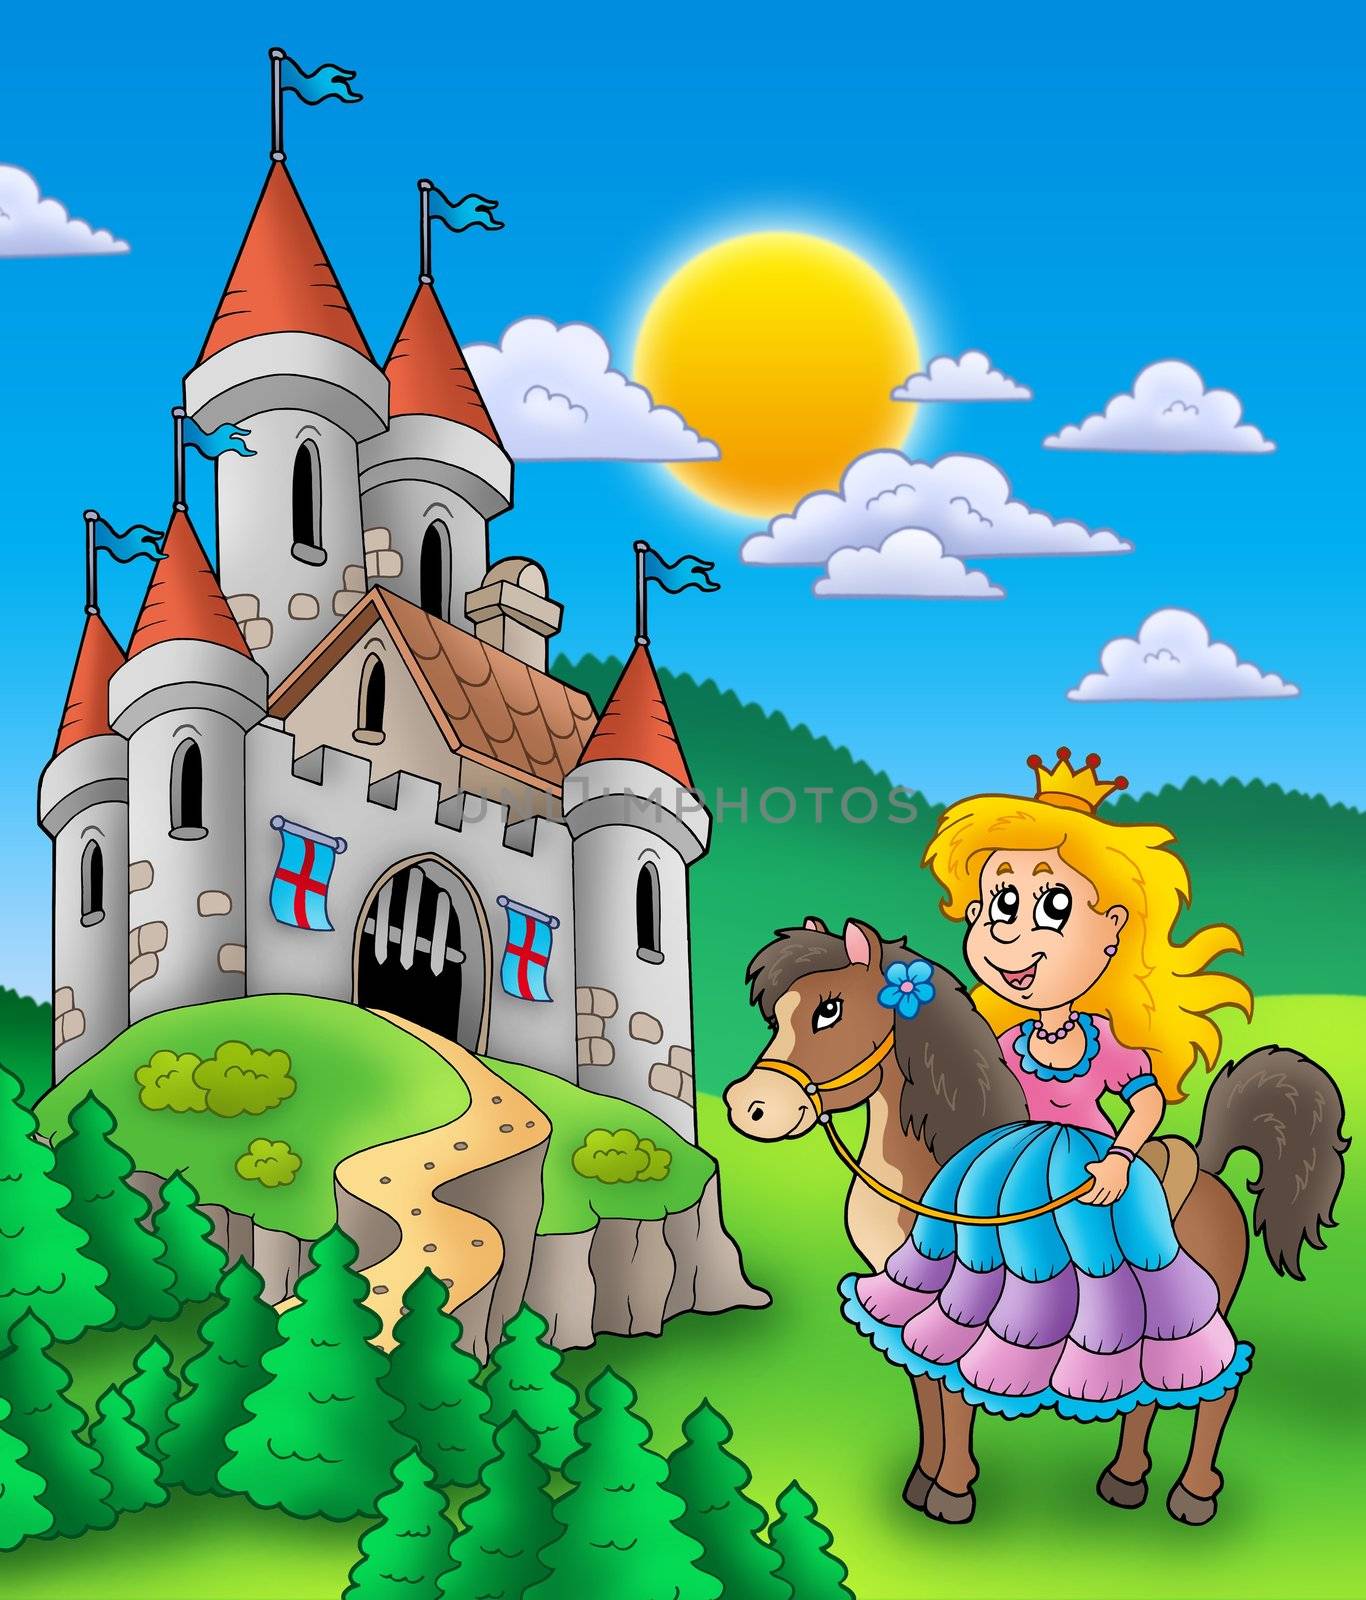 Princess on horse with castle by clairev